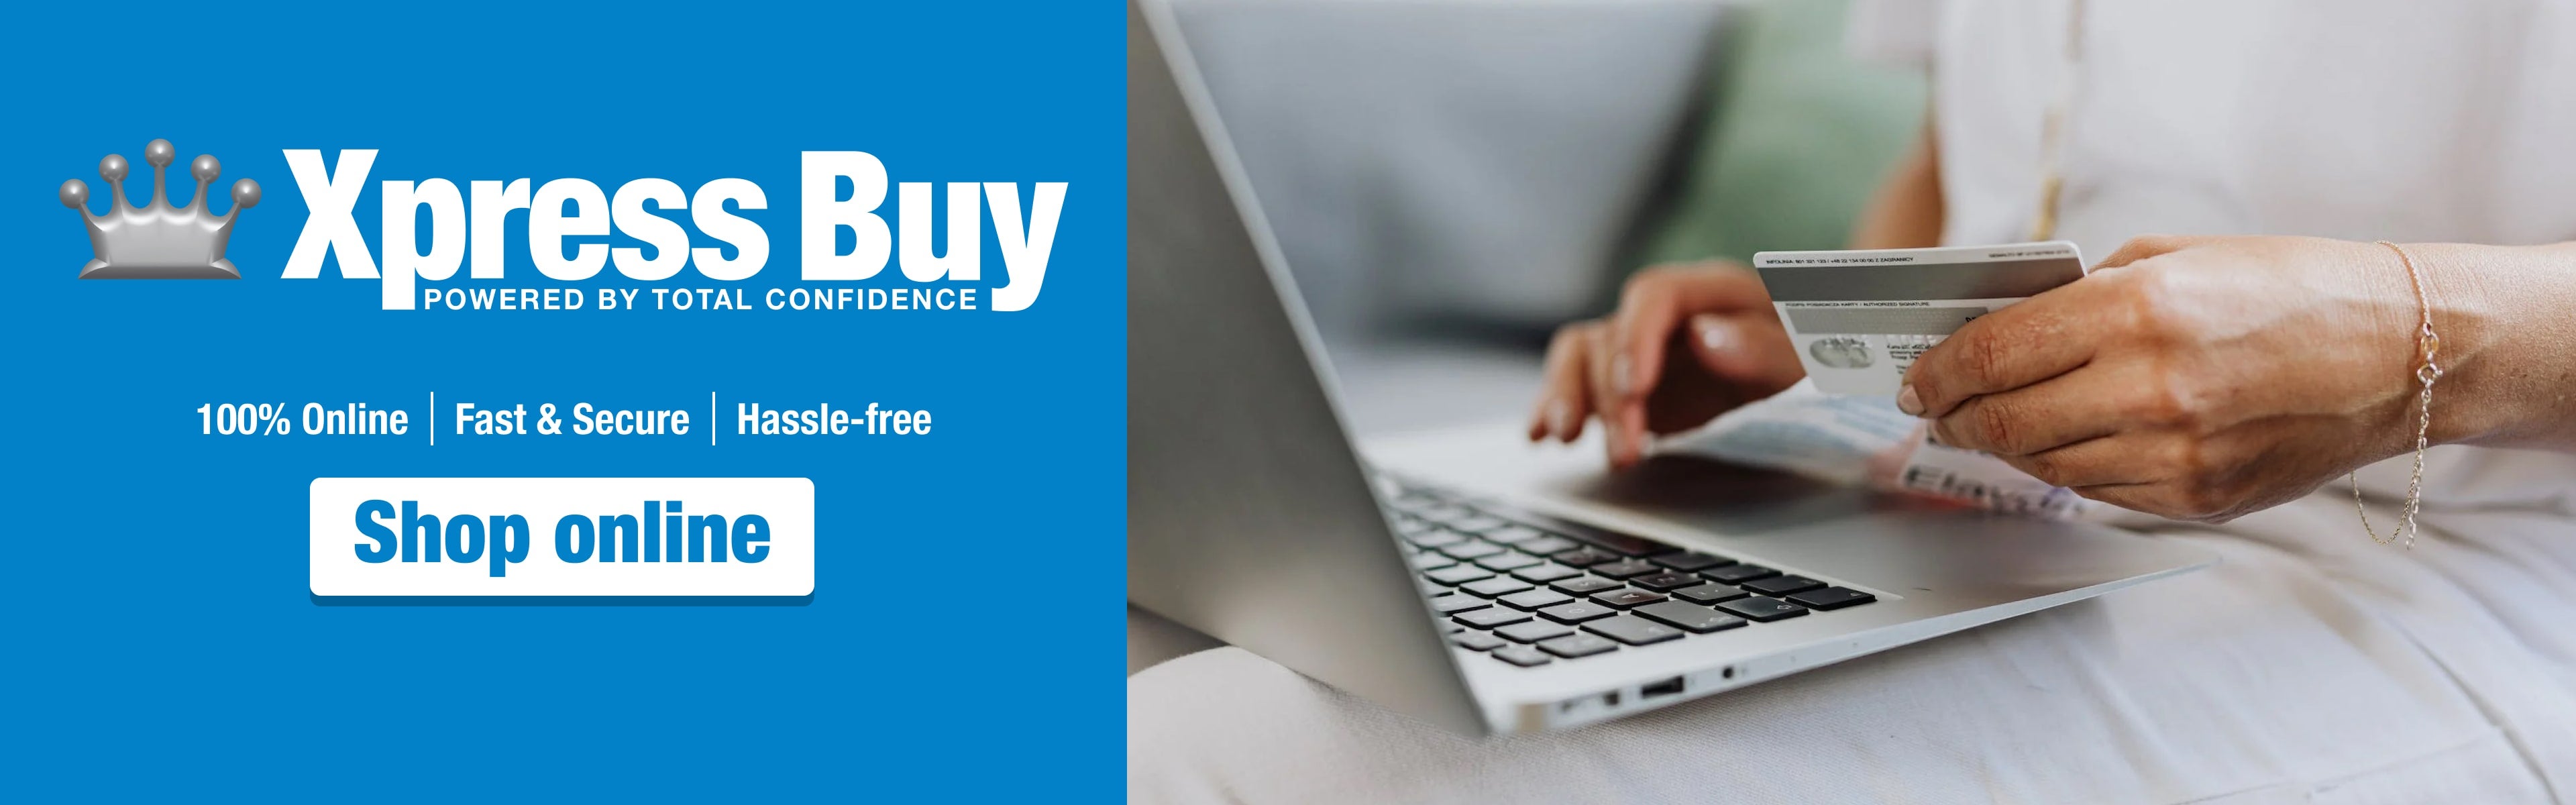 Xpress Buy. 100% online / Fast & Secure / Hassle-free